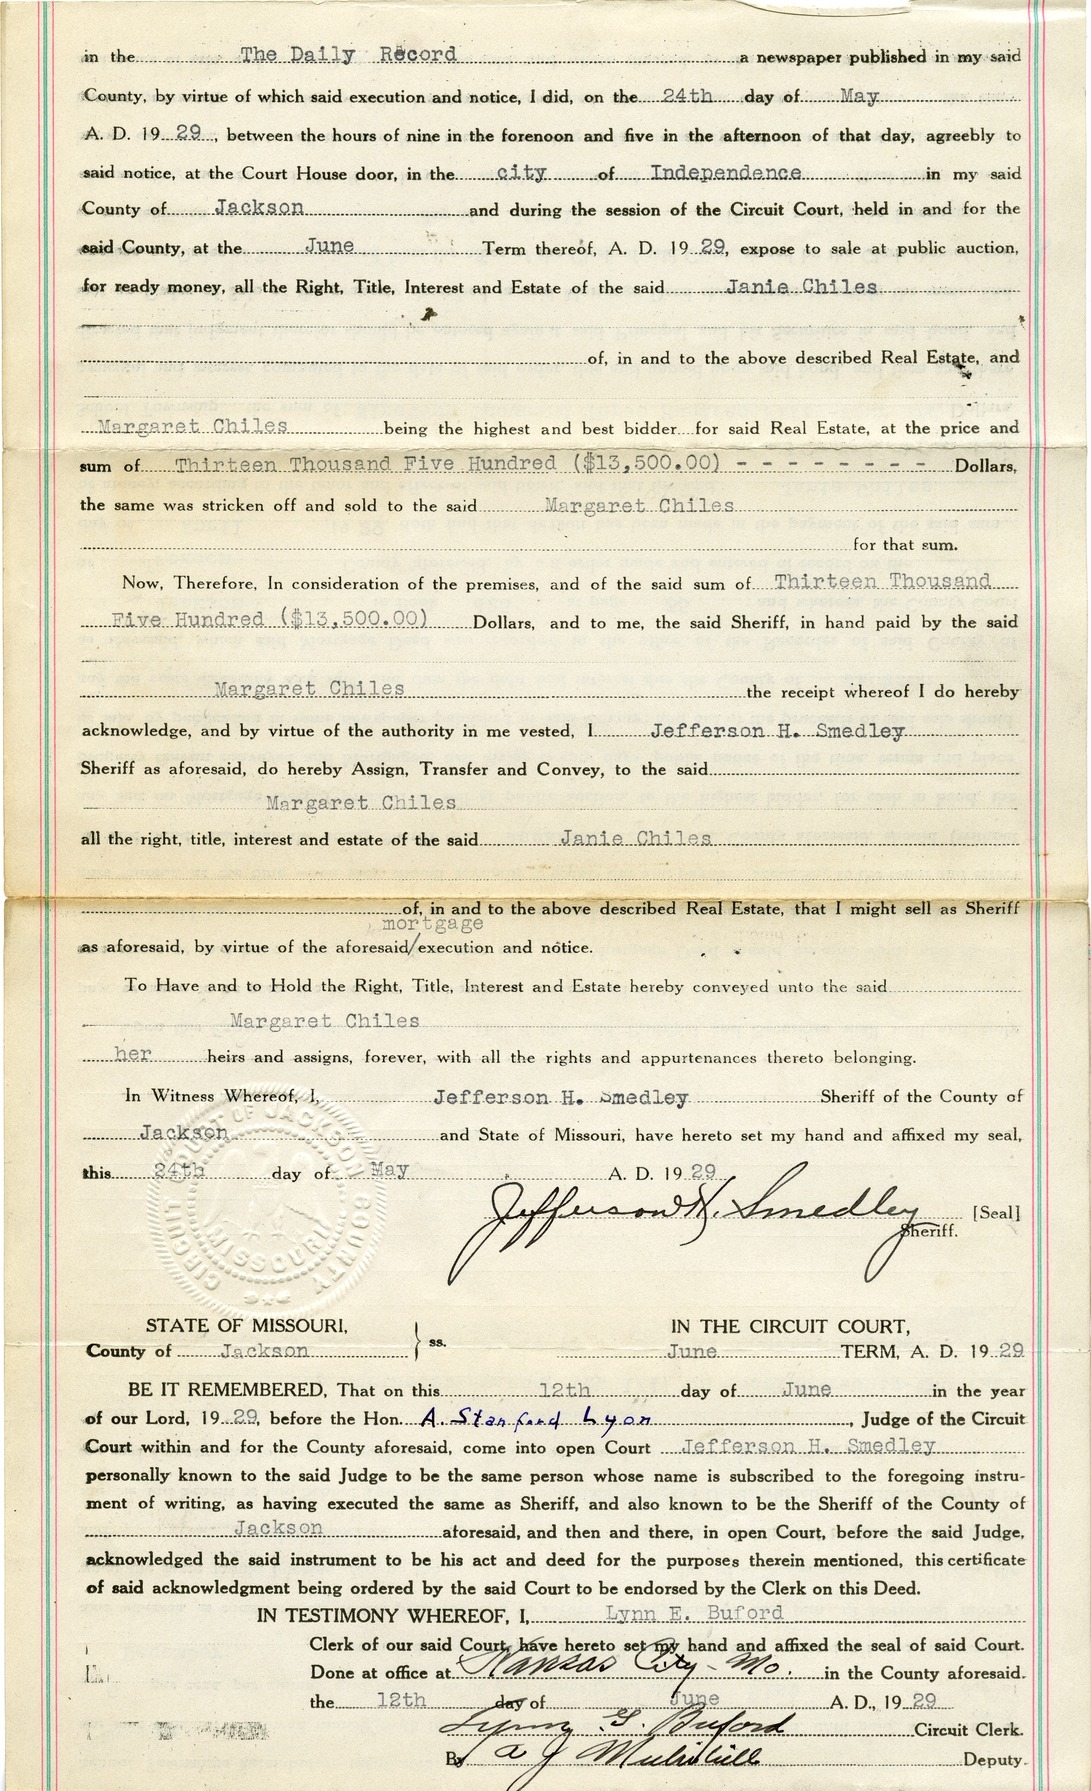 Sheriff's Deed from Janie Chiles to Margaret Chiles